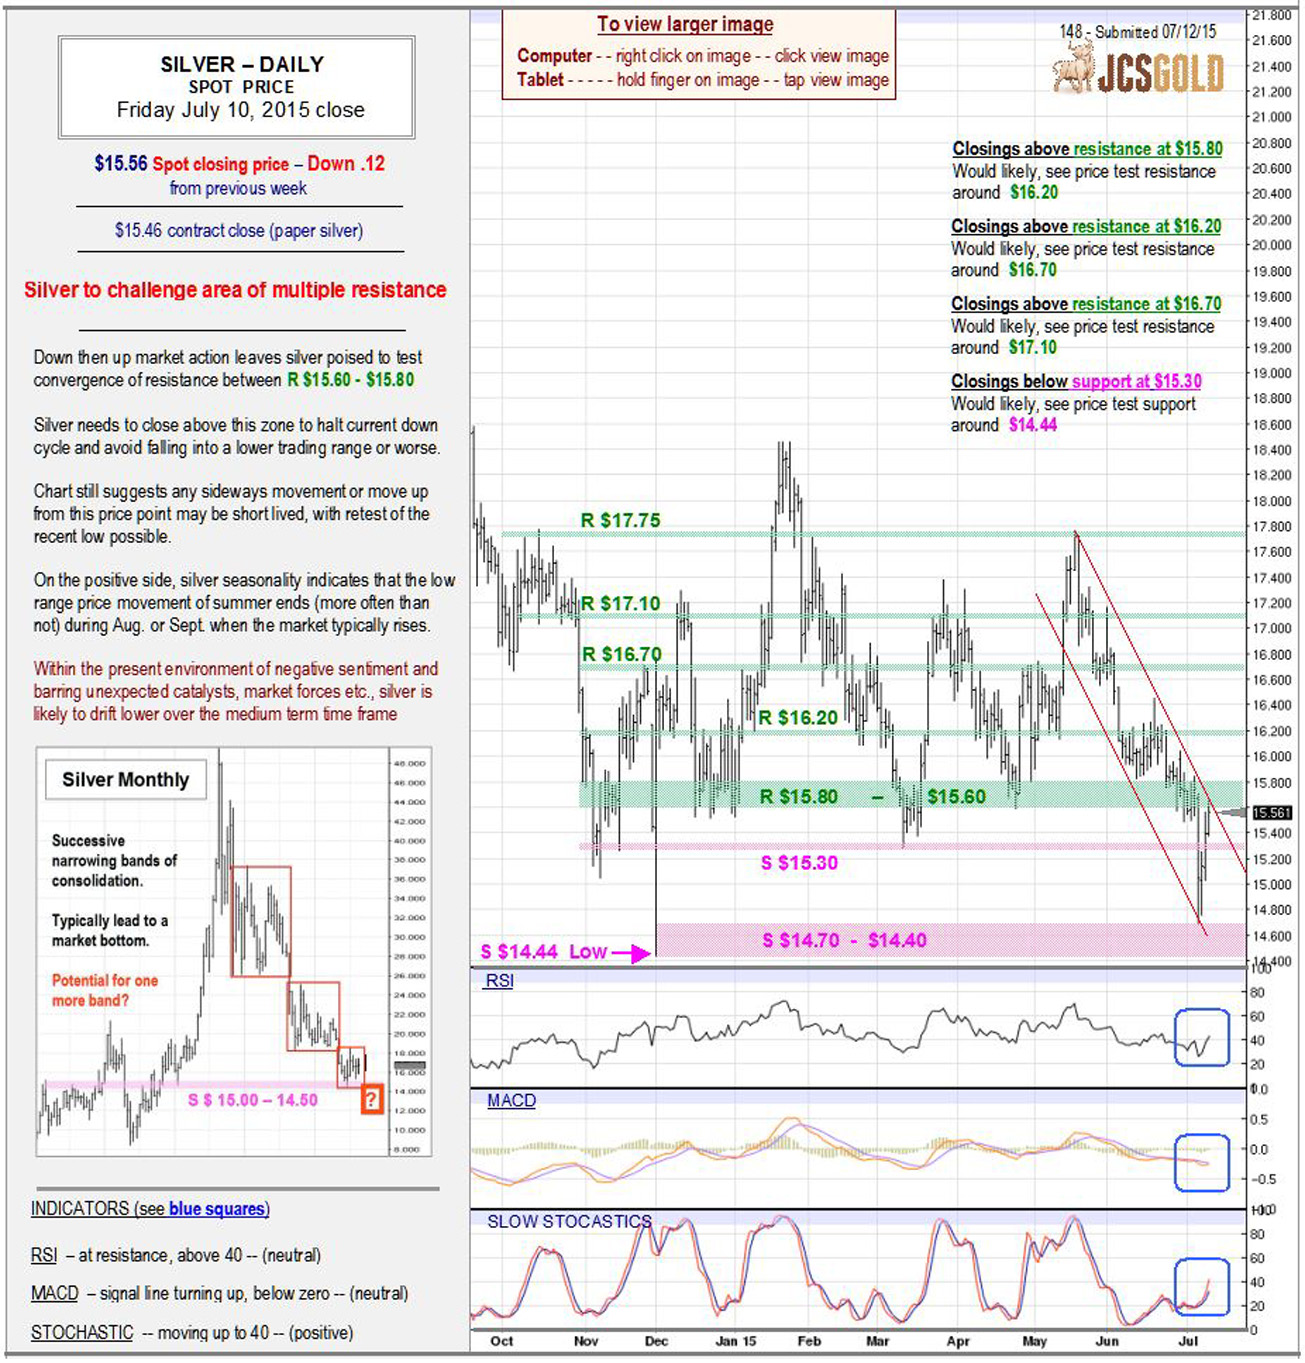 July 10, 2015 chart & commentary